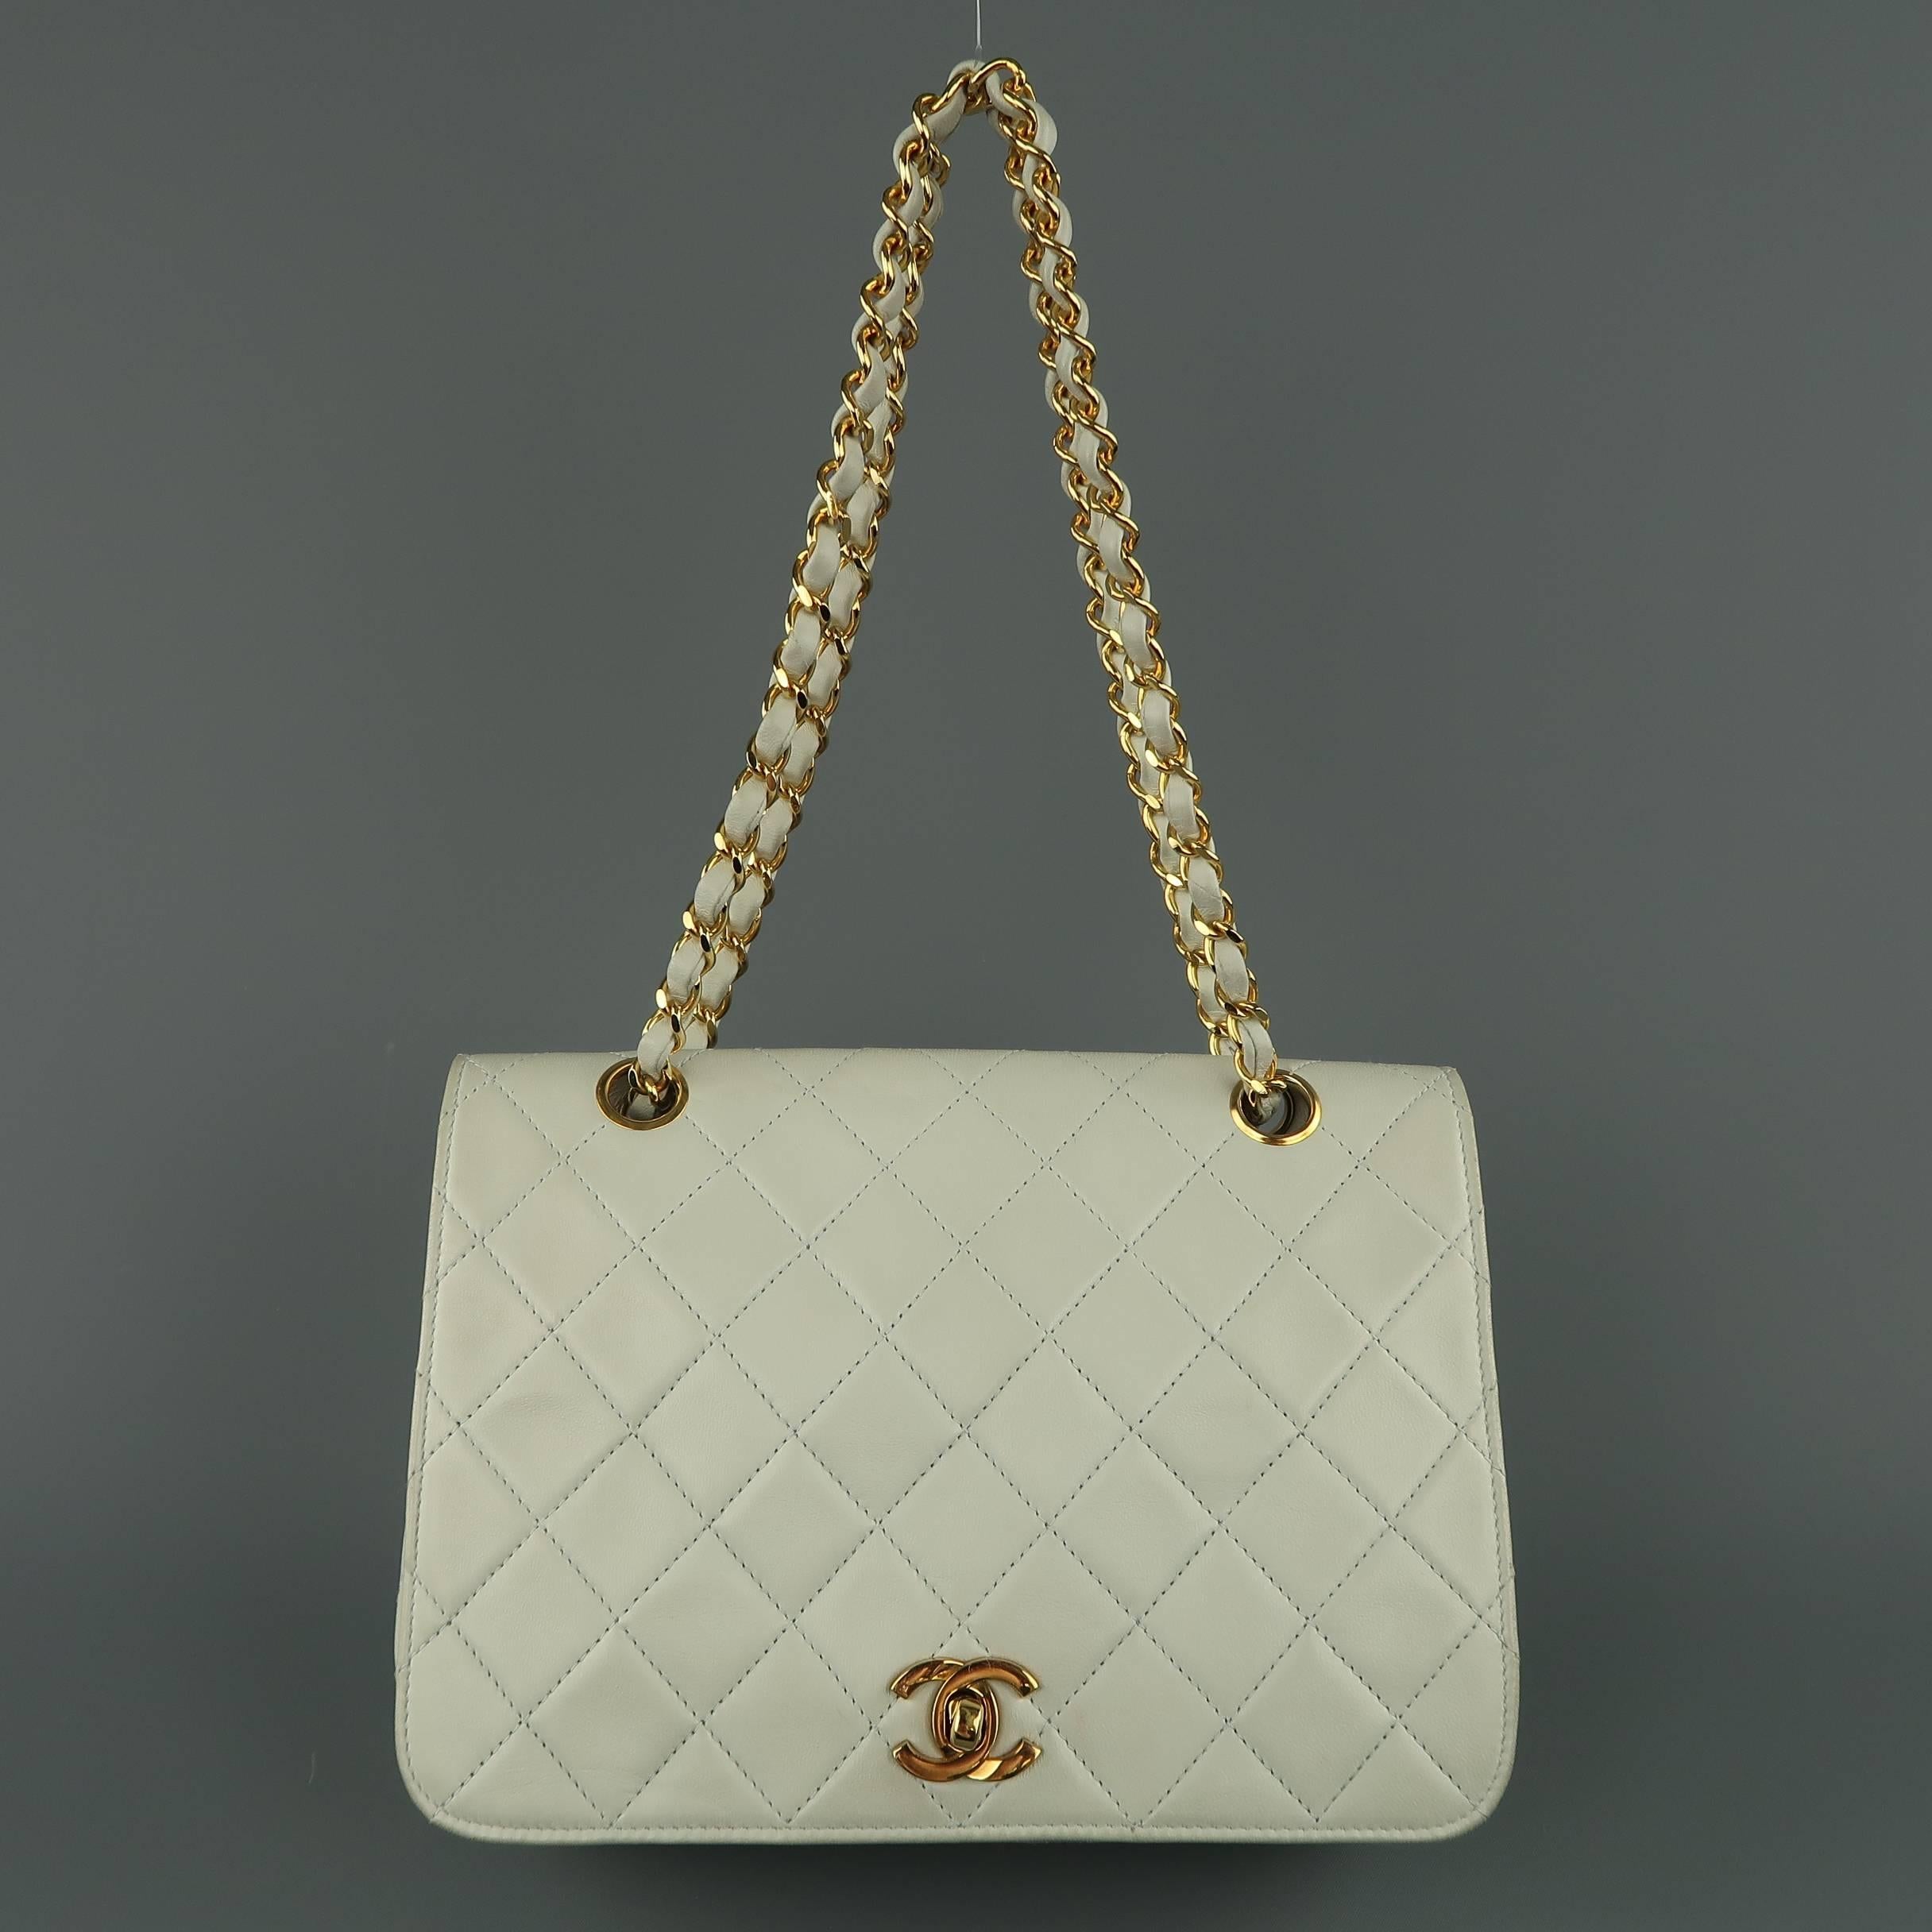 Vintage 1980's CHANEL bag comes in pastel minty blue quilted leather and features a flap with gold tone CC twist closure, white leather interior with pockets, and gold tone leather woven chain strap with grommets. Discolorations and wear throughout